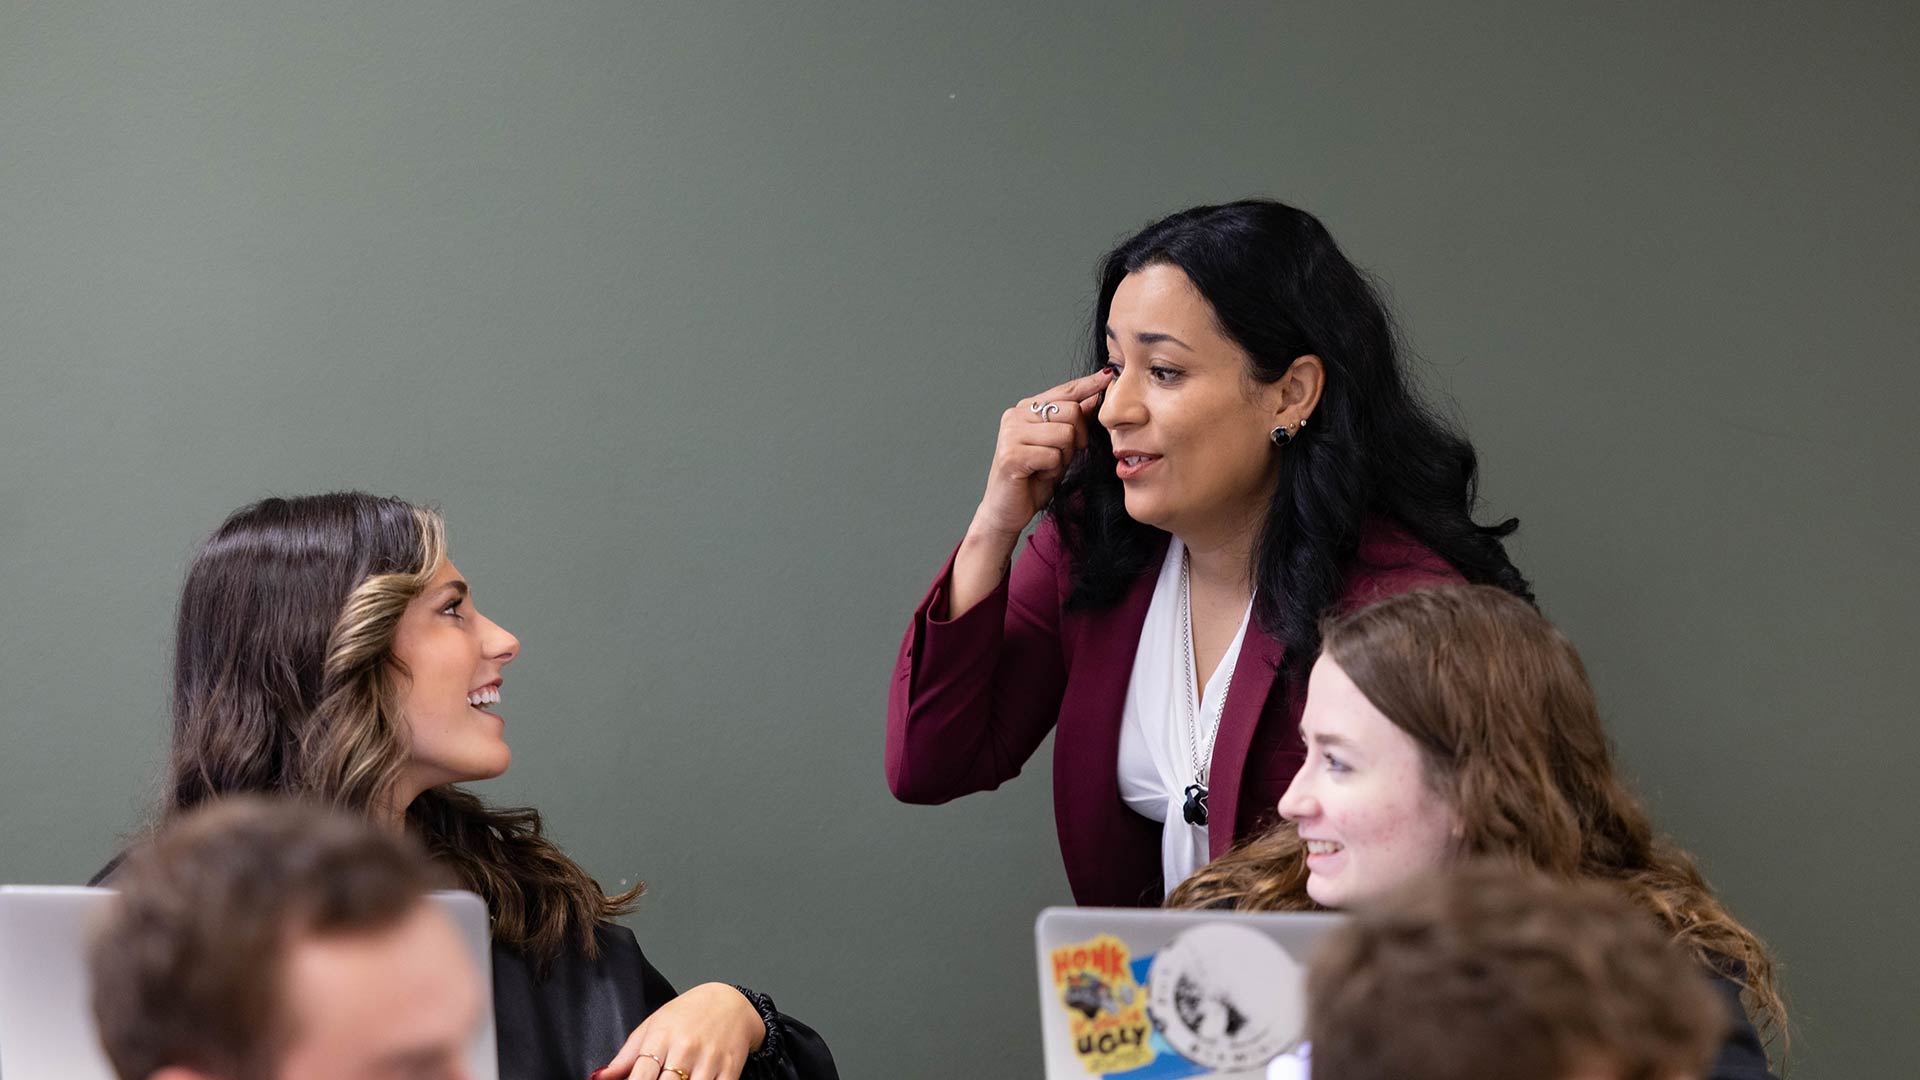 A language professor talks to two students during class.